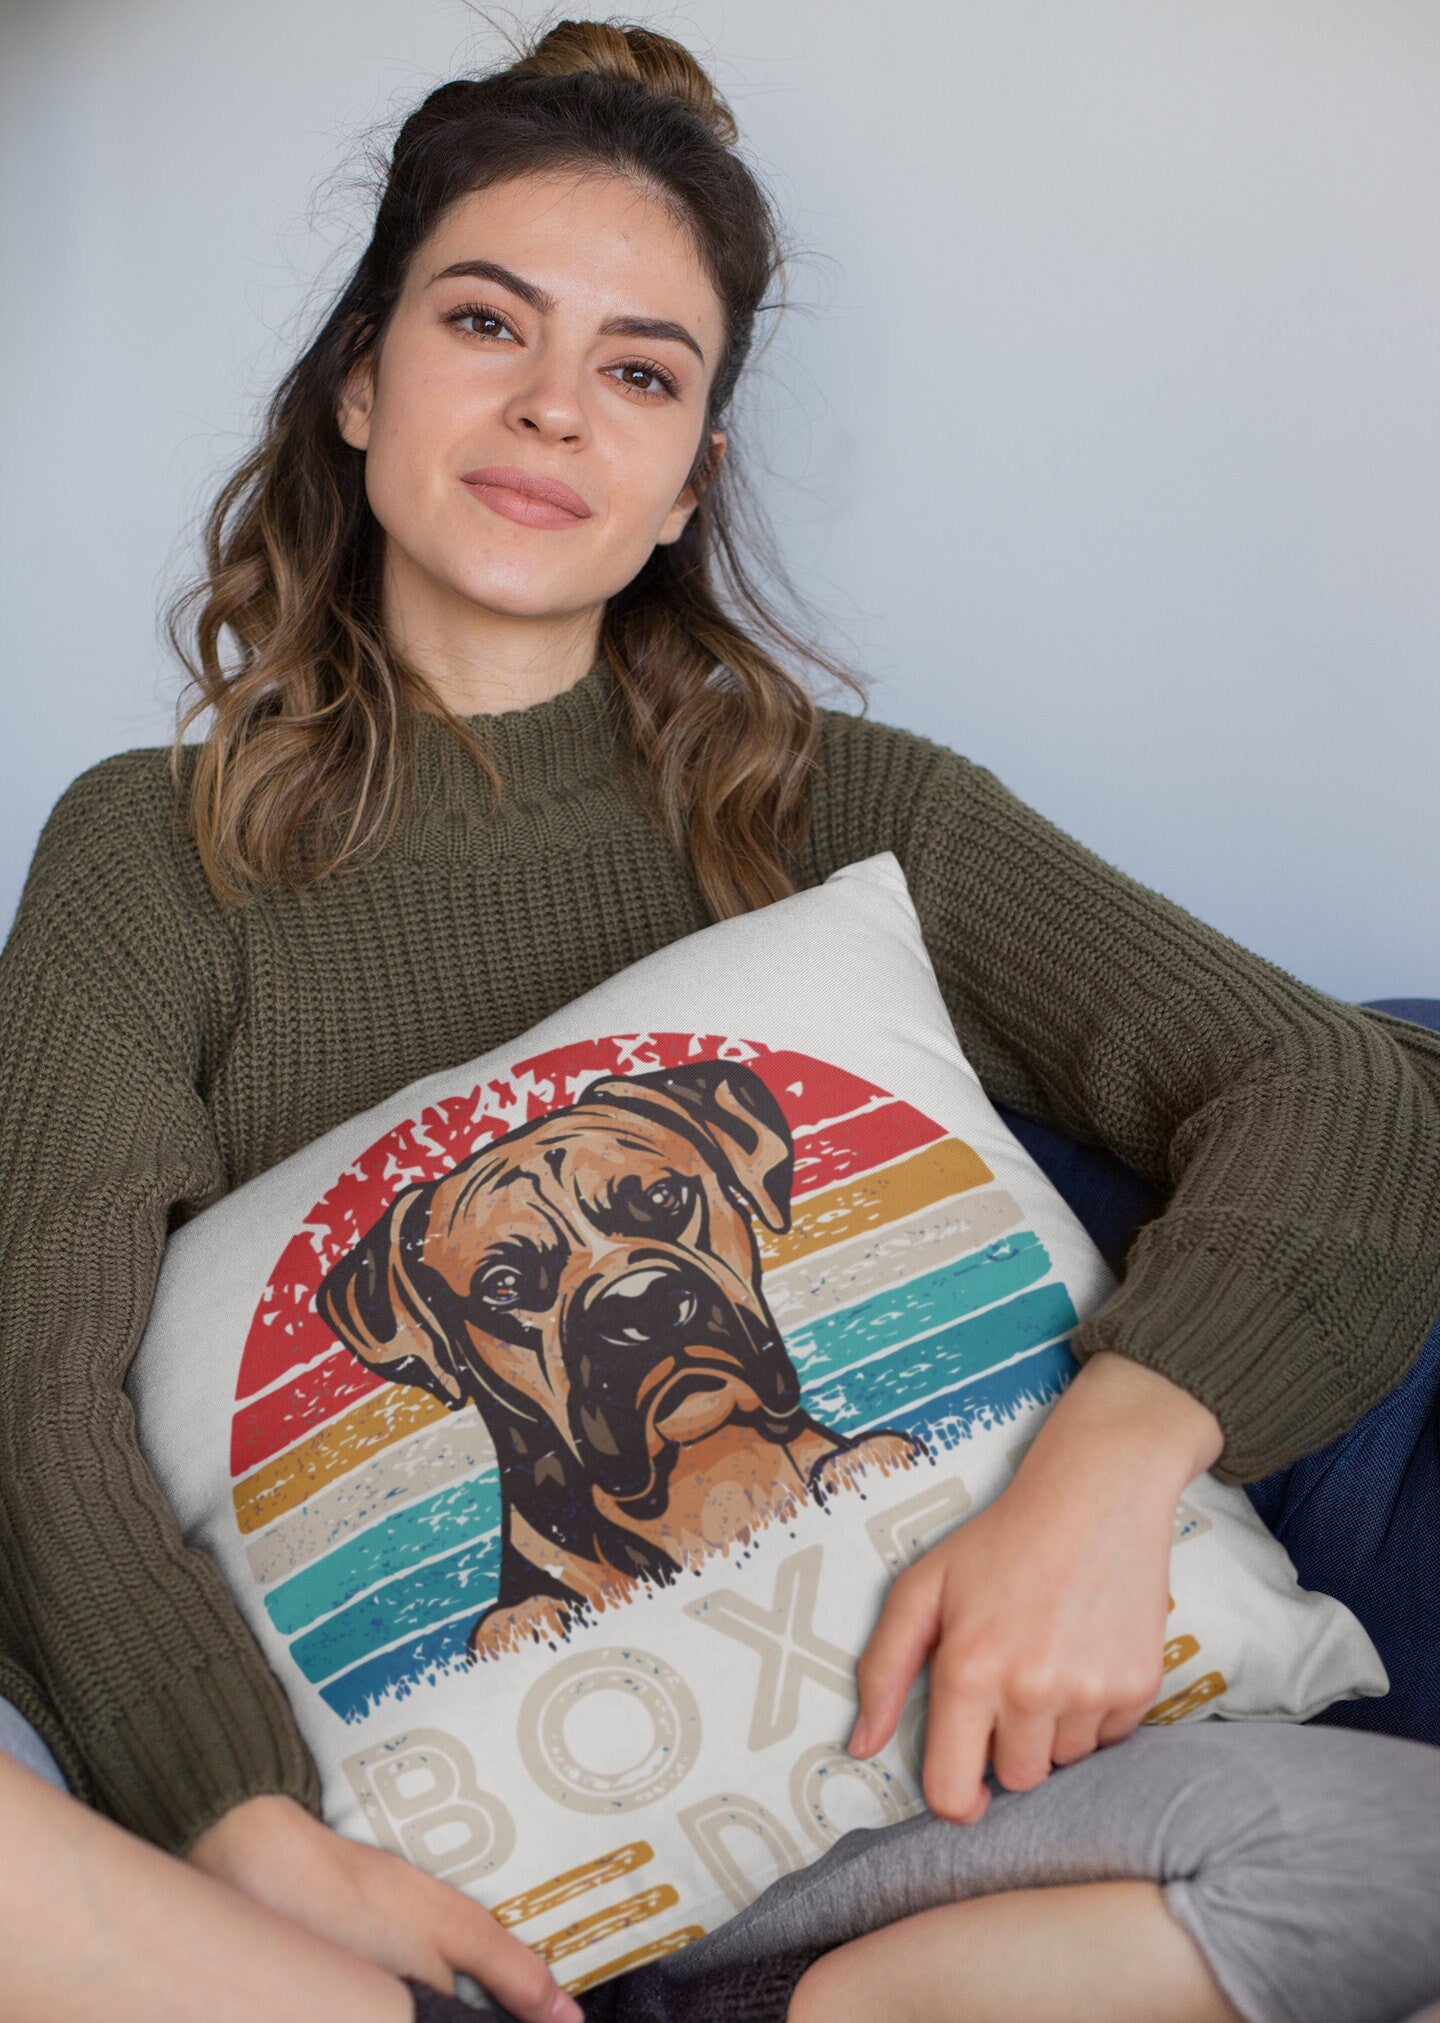 If you are a Boxer Lover, you just know! Spun Polyester Square Pillow